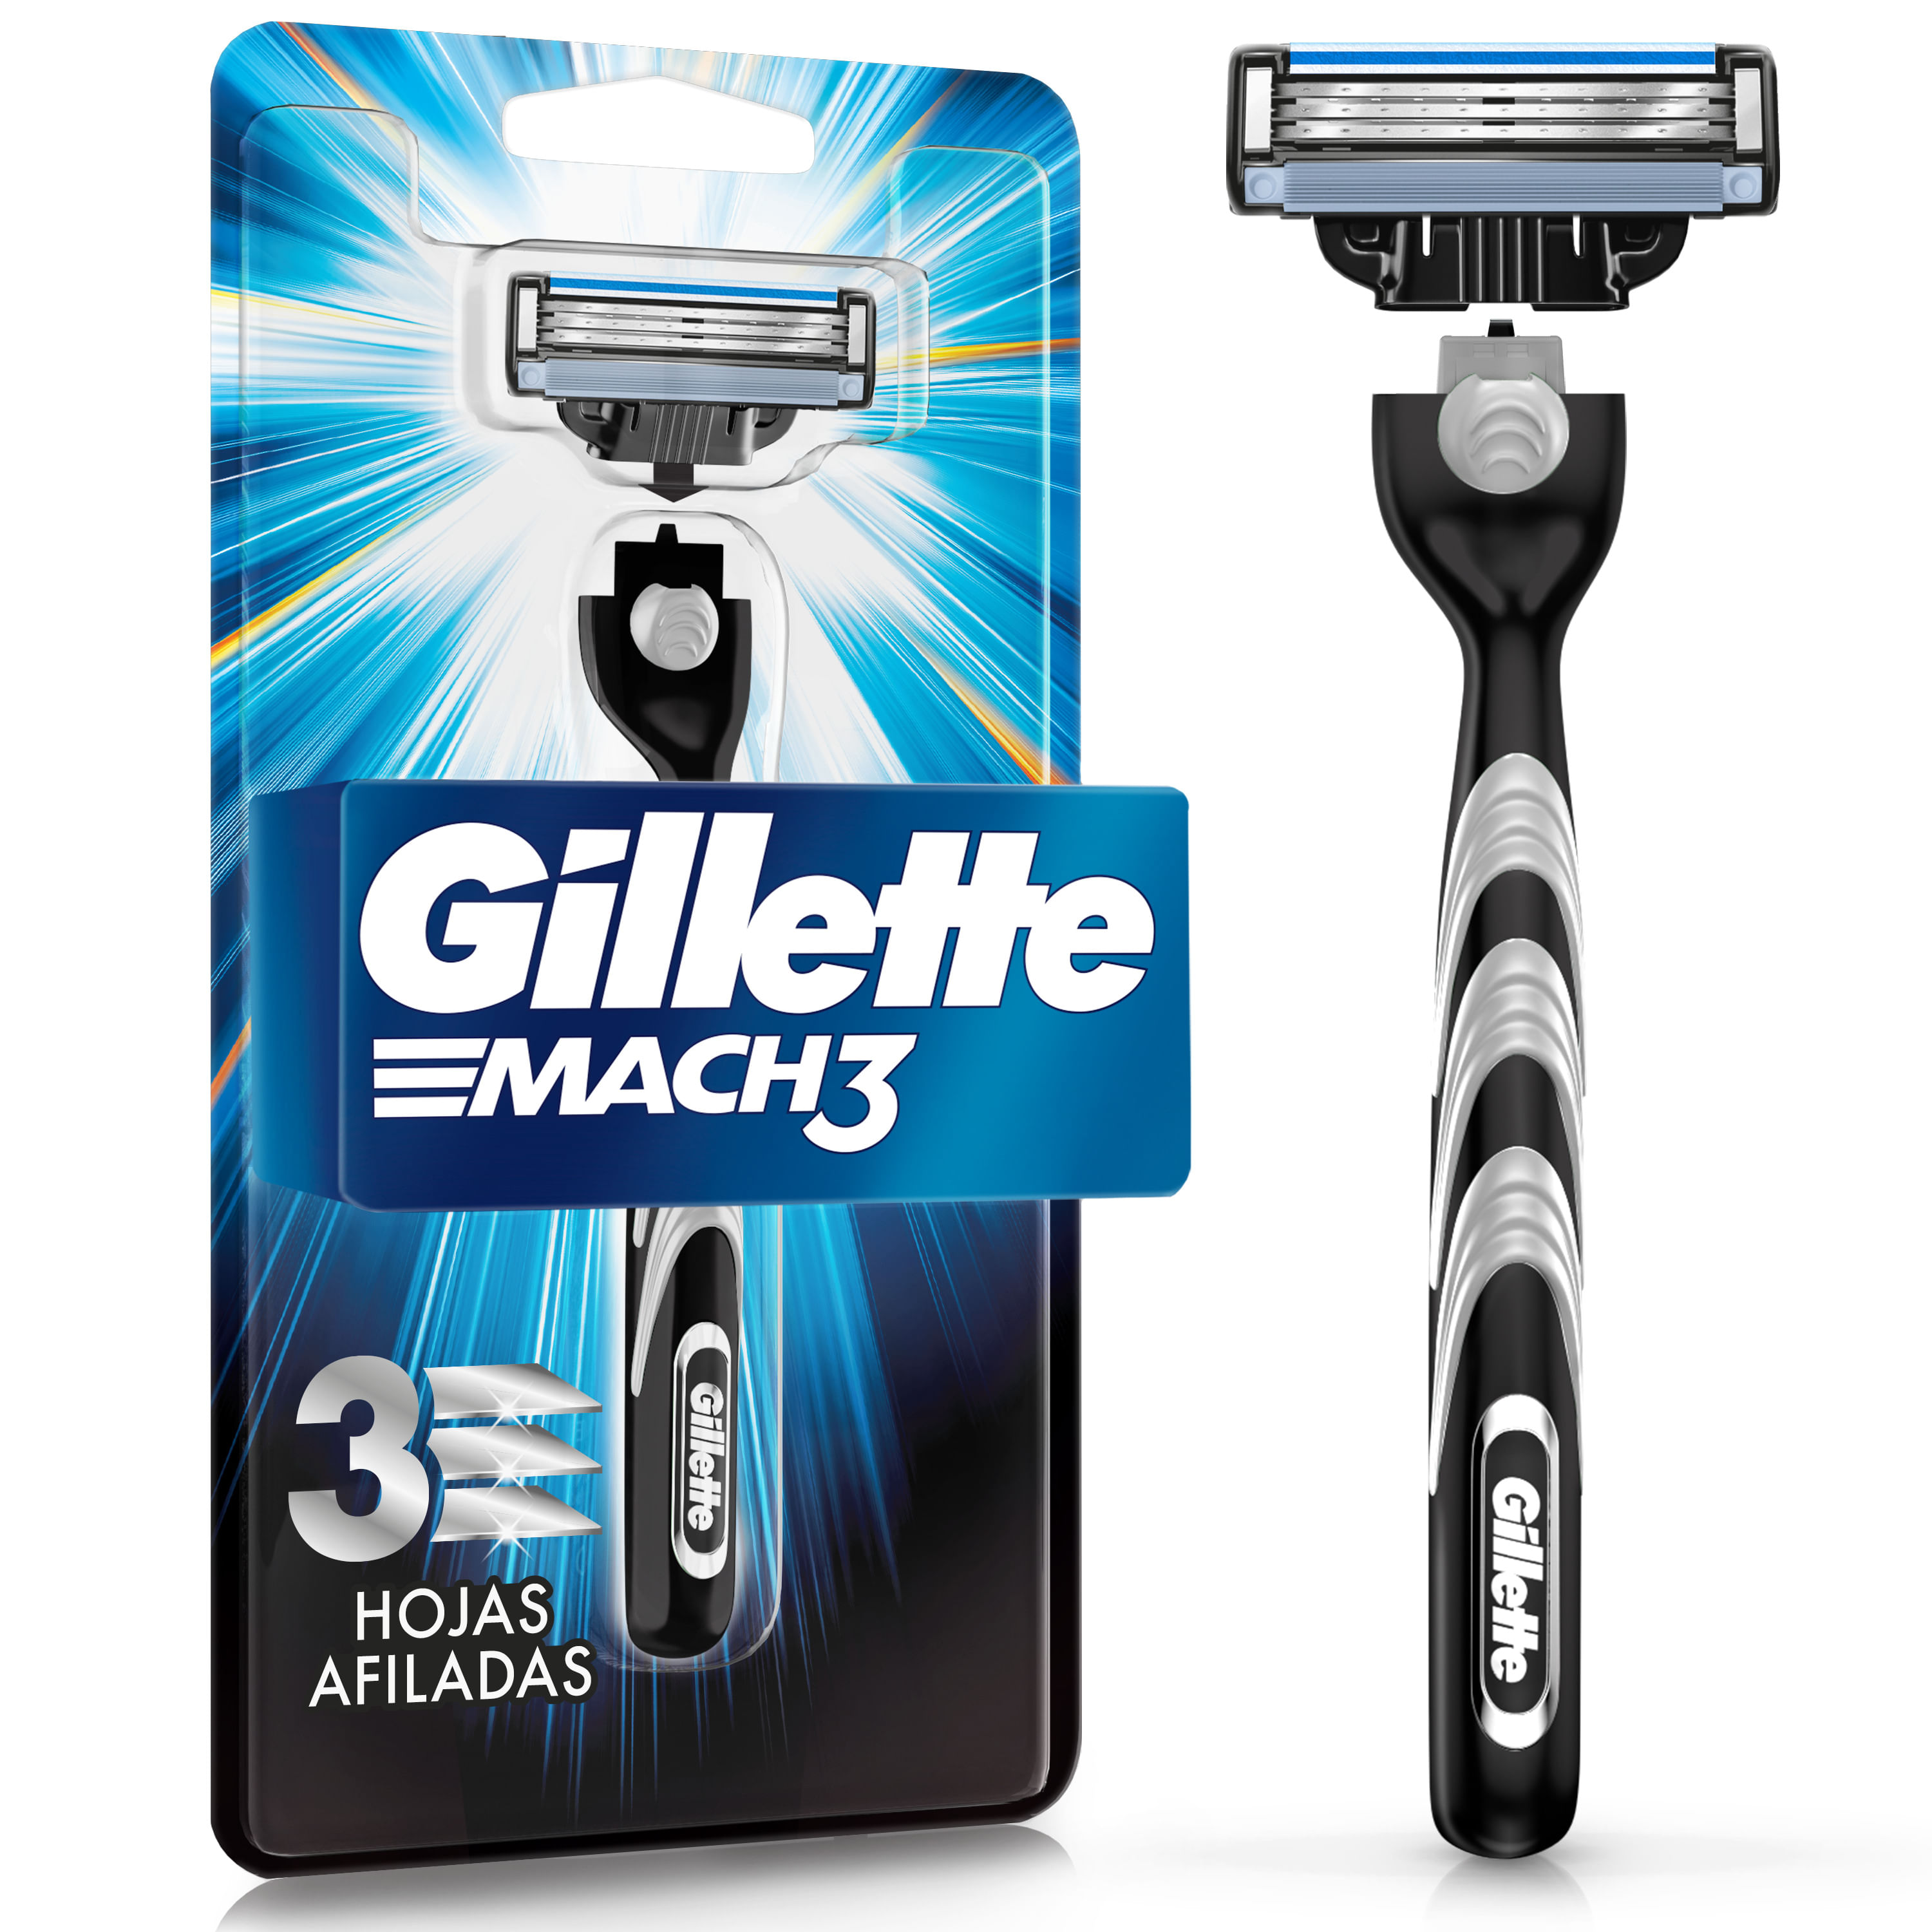 Buy Gillette MACH3 from £5.49 (Today) – Best Deals on